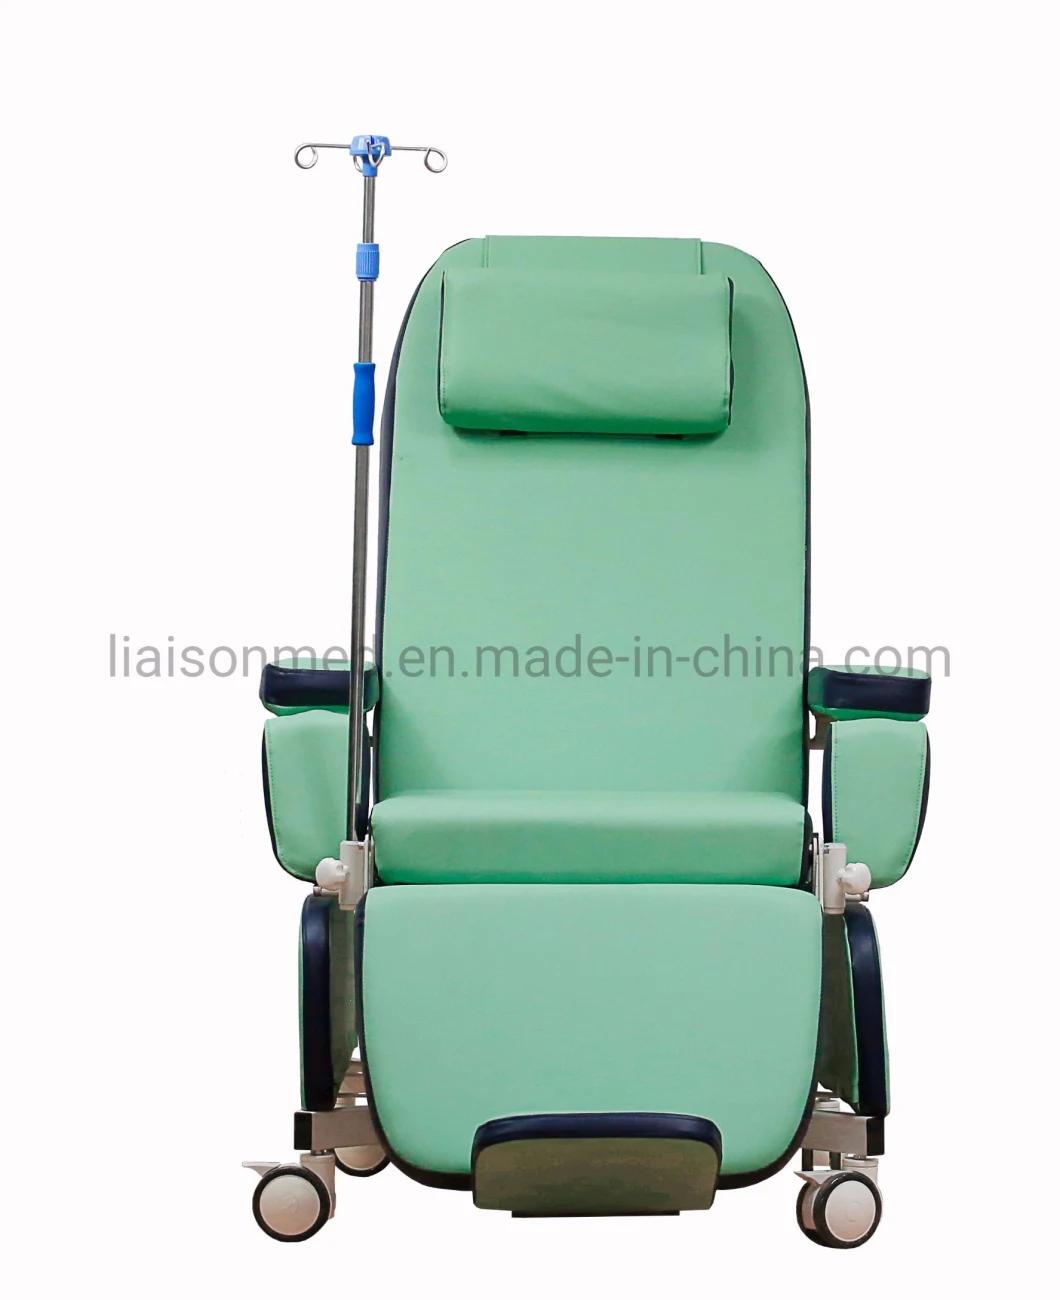 Mn-Bdc002 Medical Electric Blood Dialysis Treatment Chair with Multi-Colors